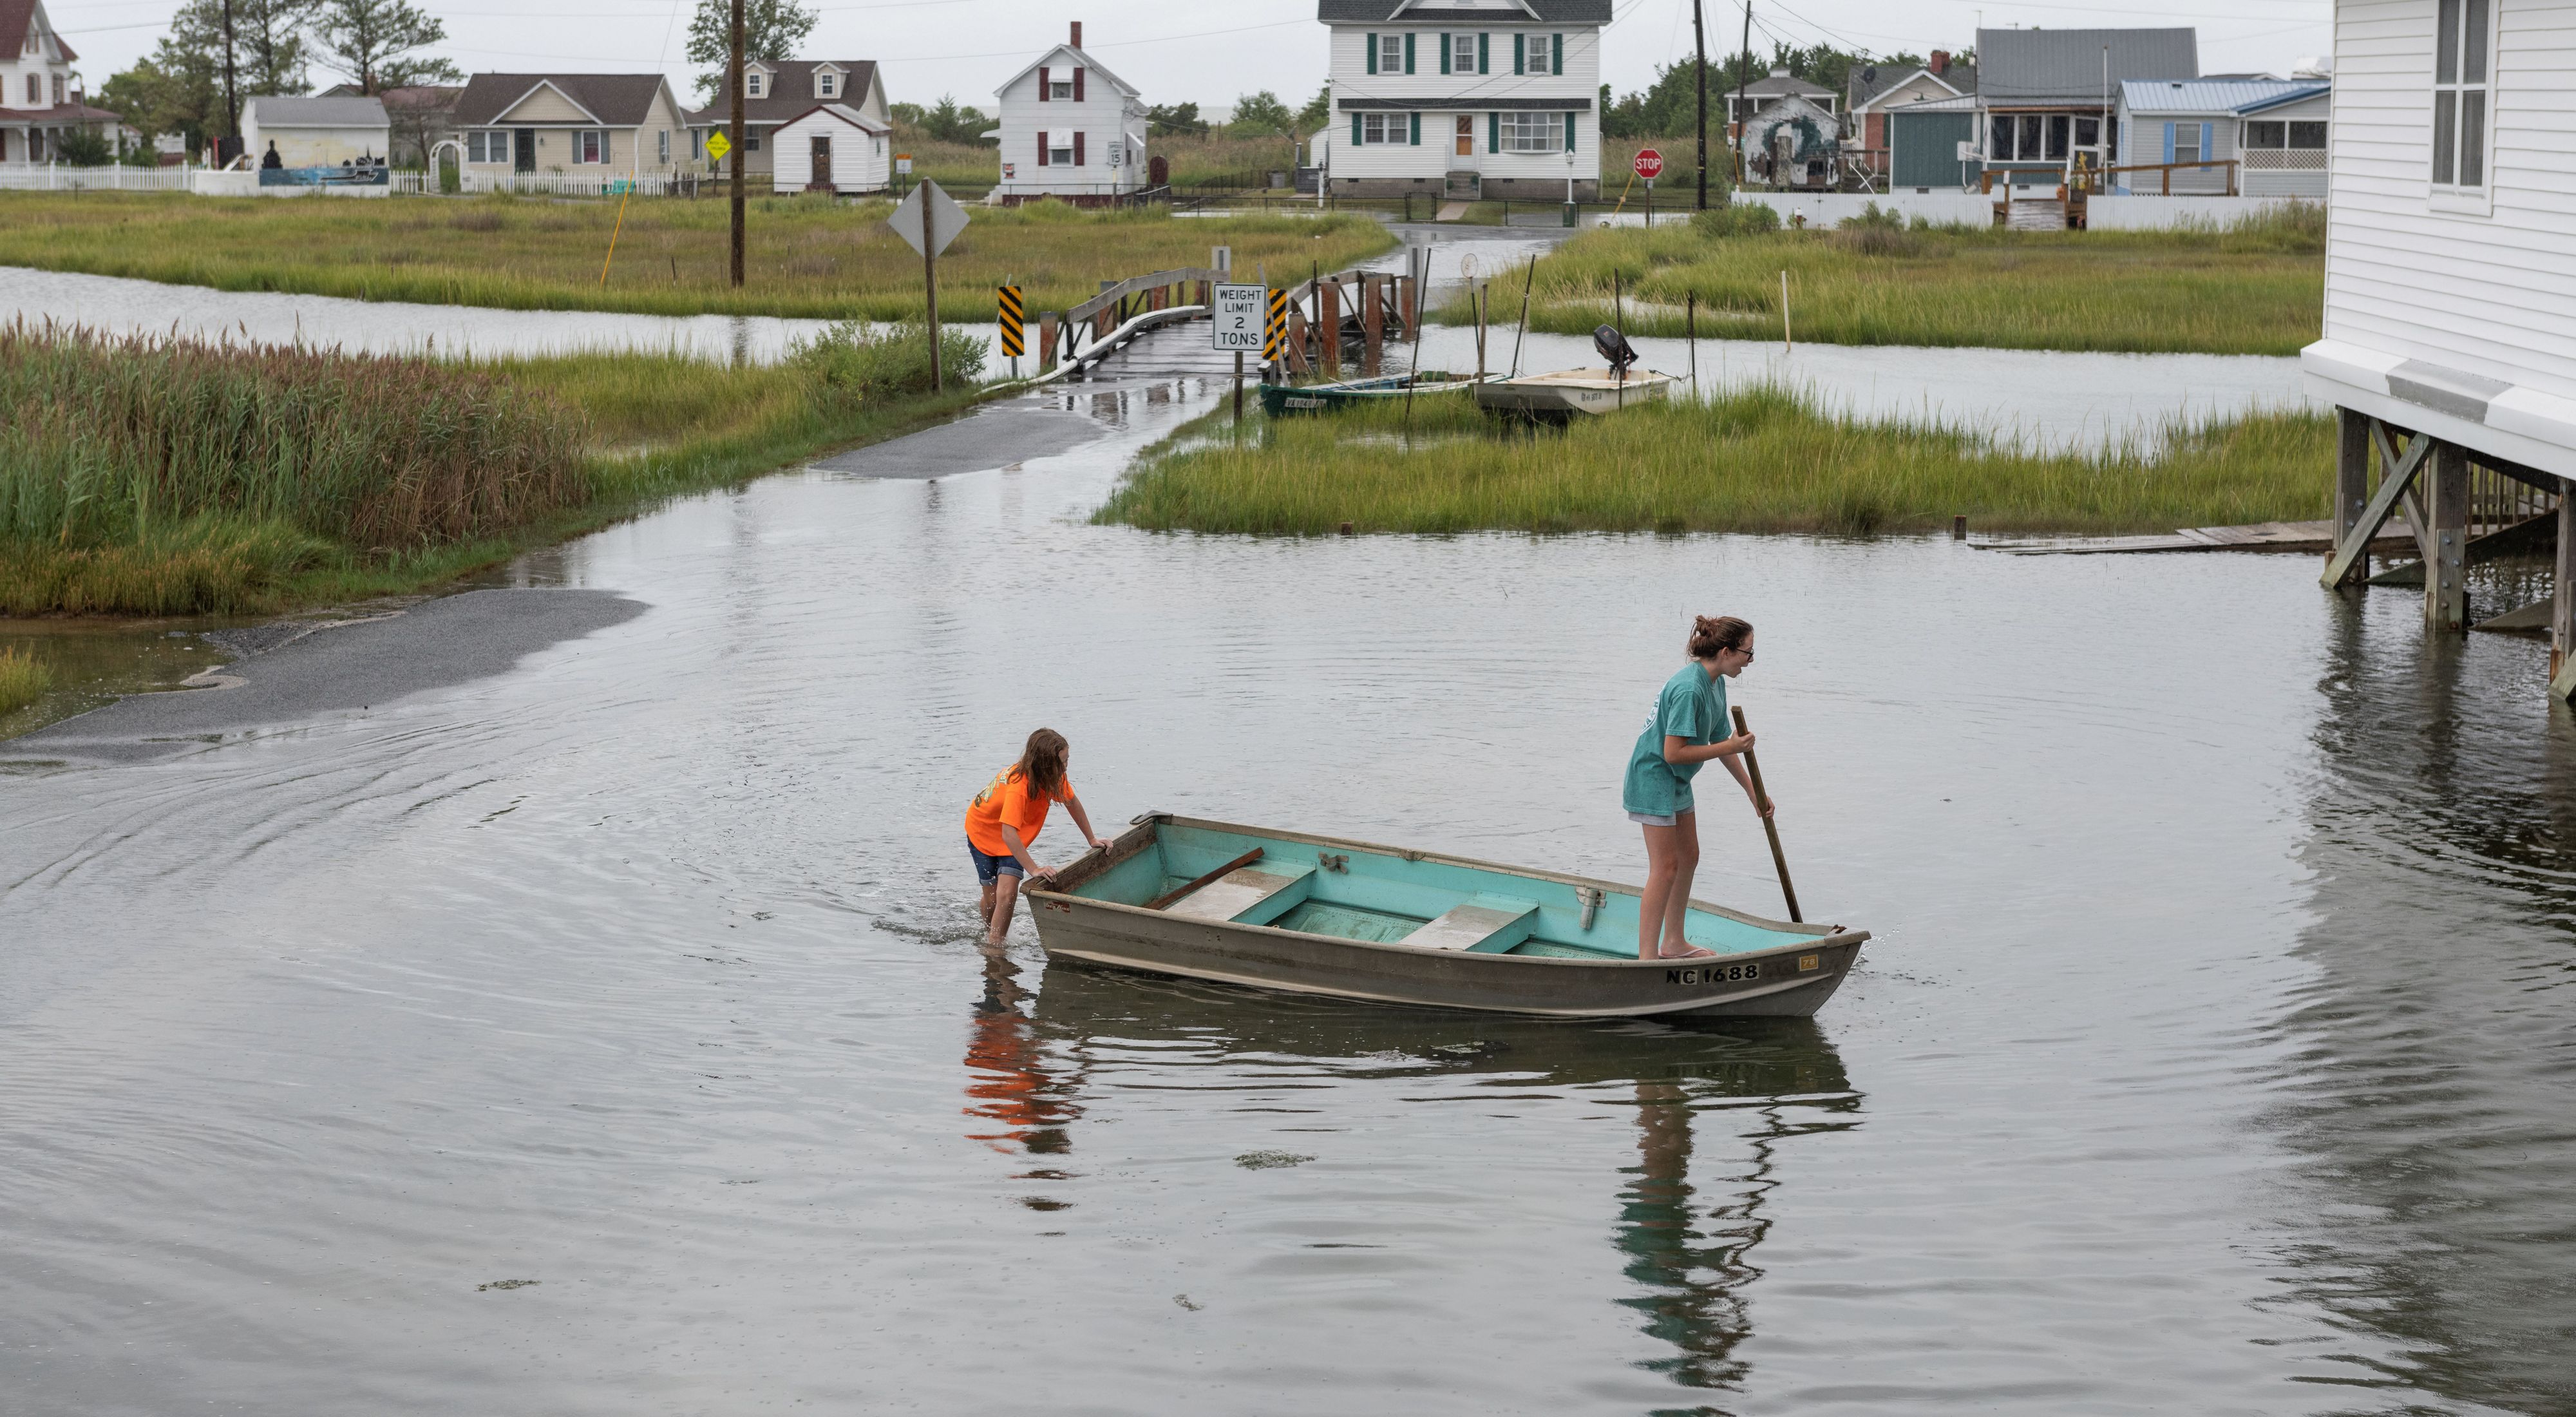 Two girls in a rowboat in a flooded Maryland town.